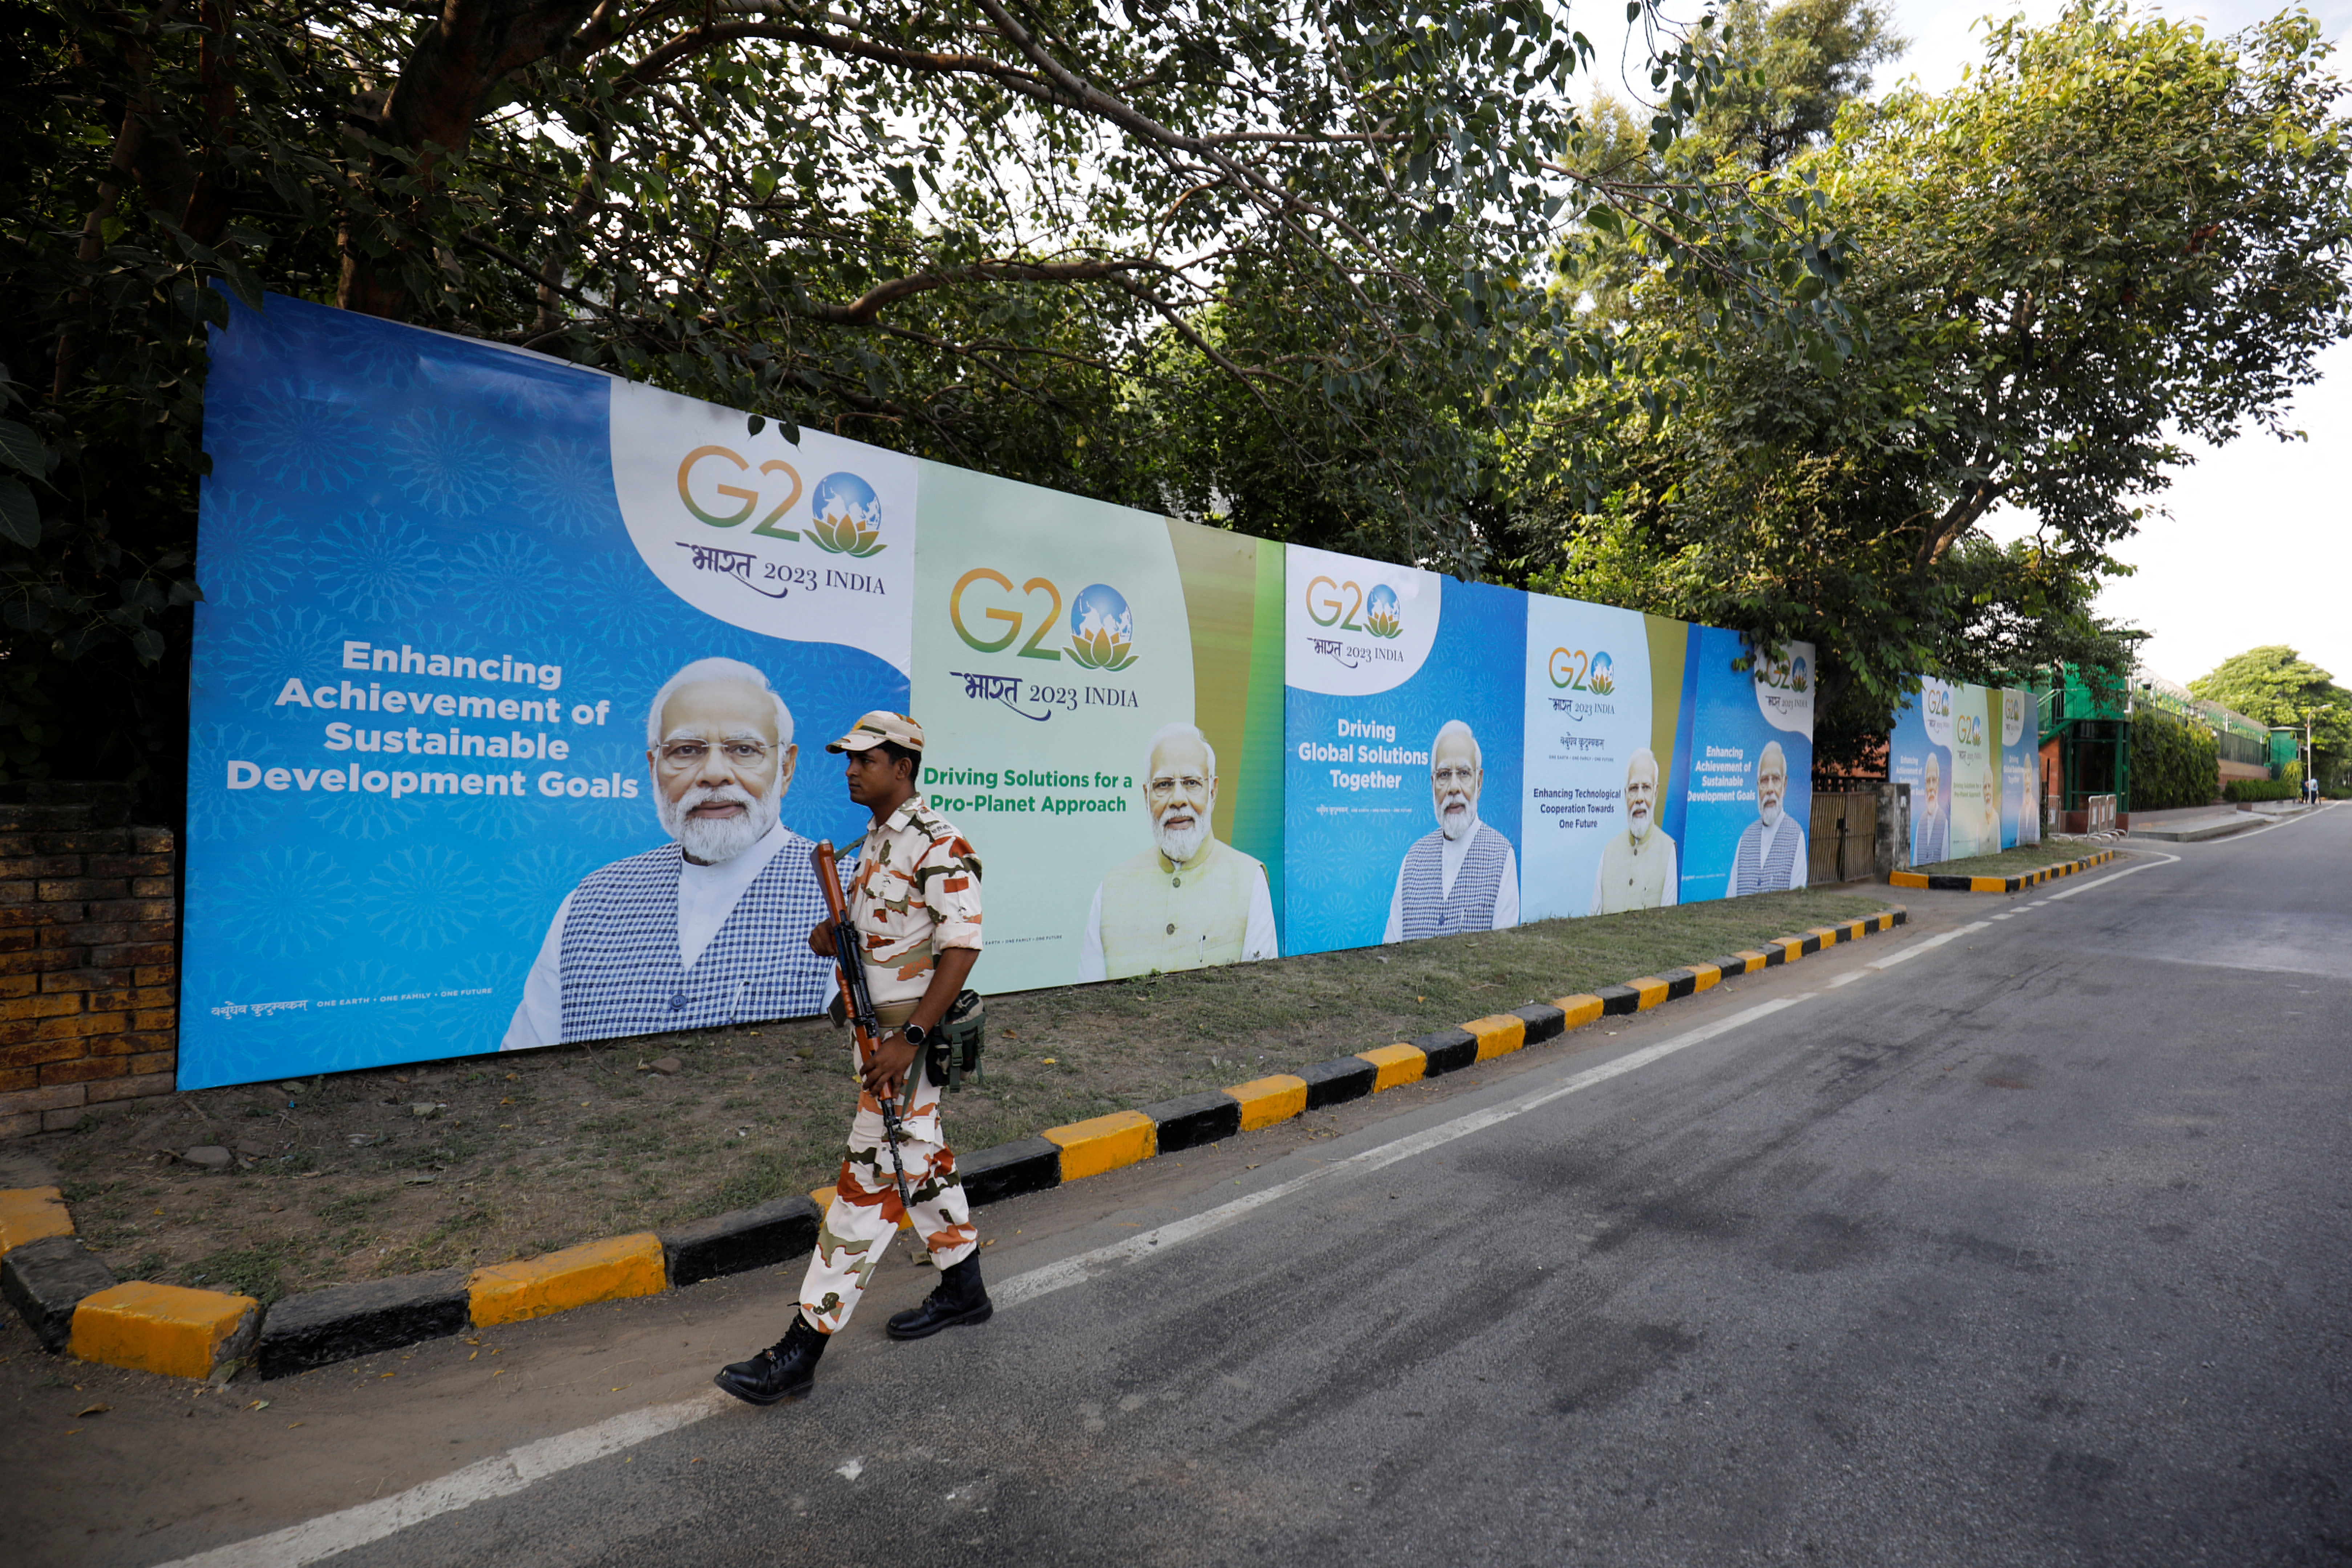 A security force personnel patrols past hoardings featuring India's PM Modi along an empty road ahead of the G20 Summit in New Delhi